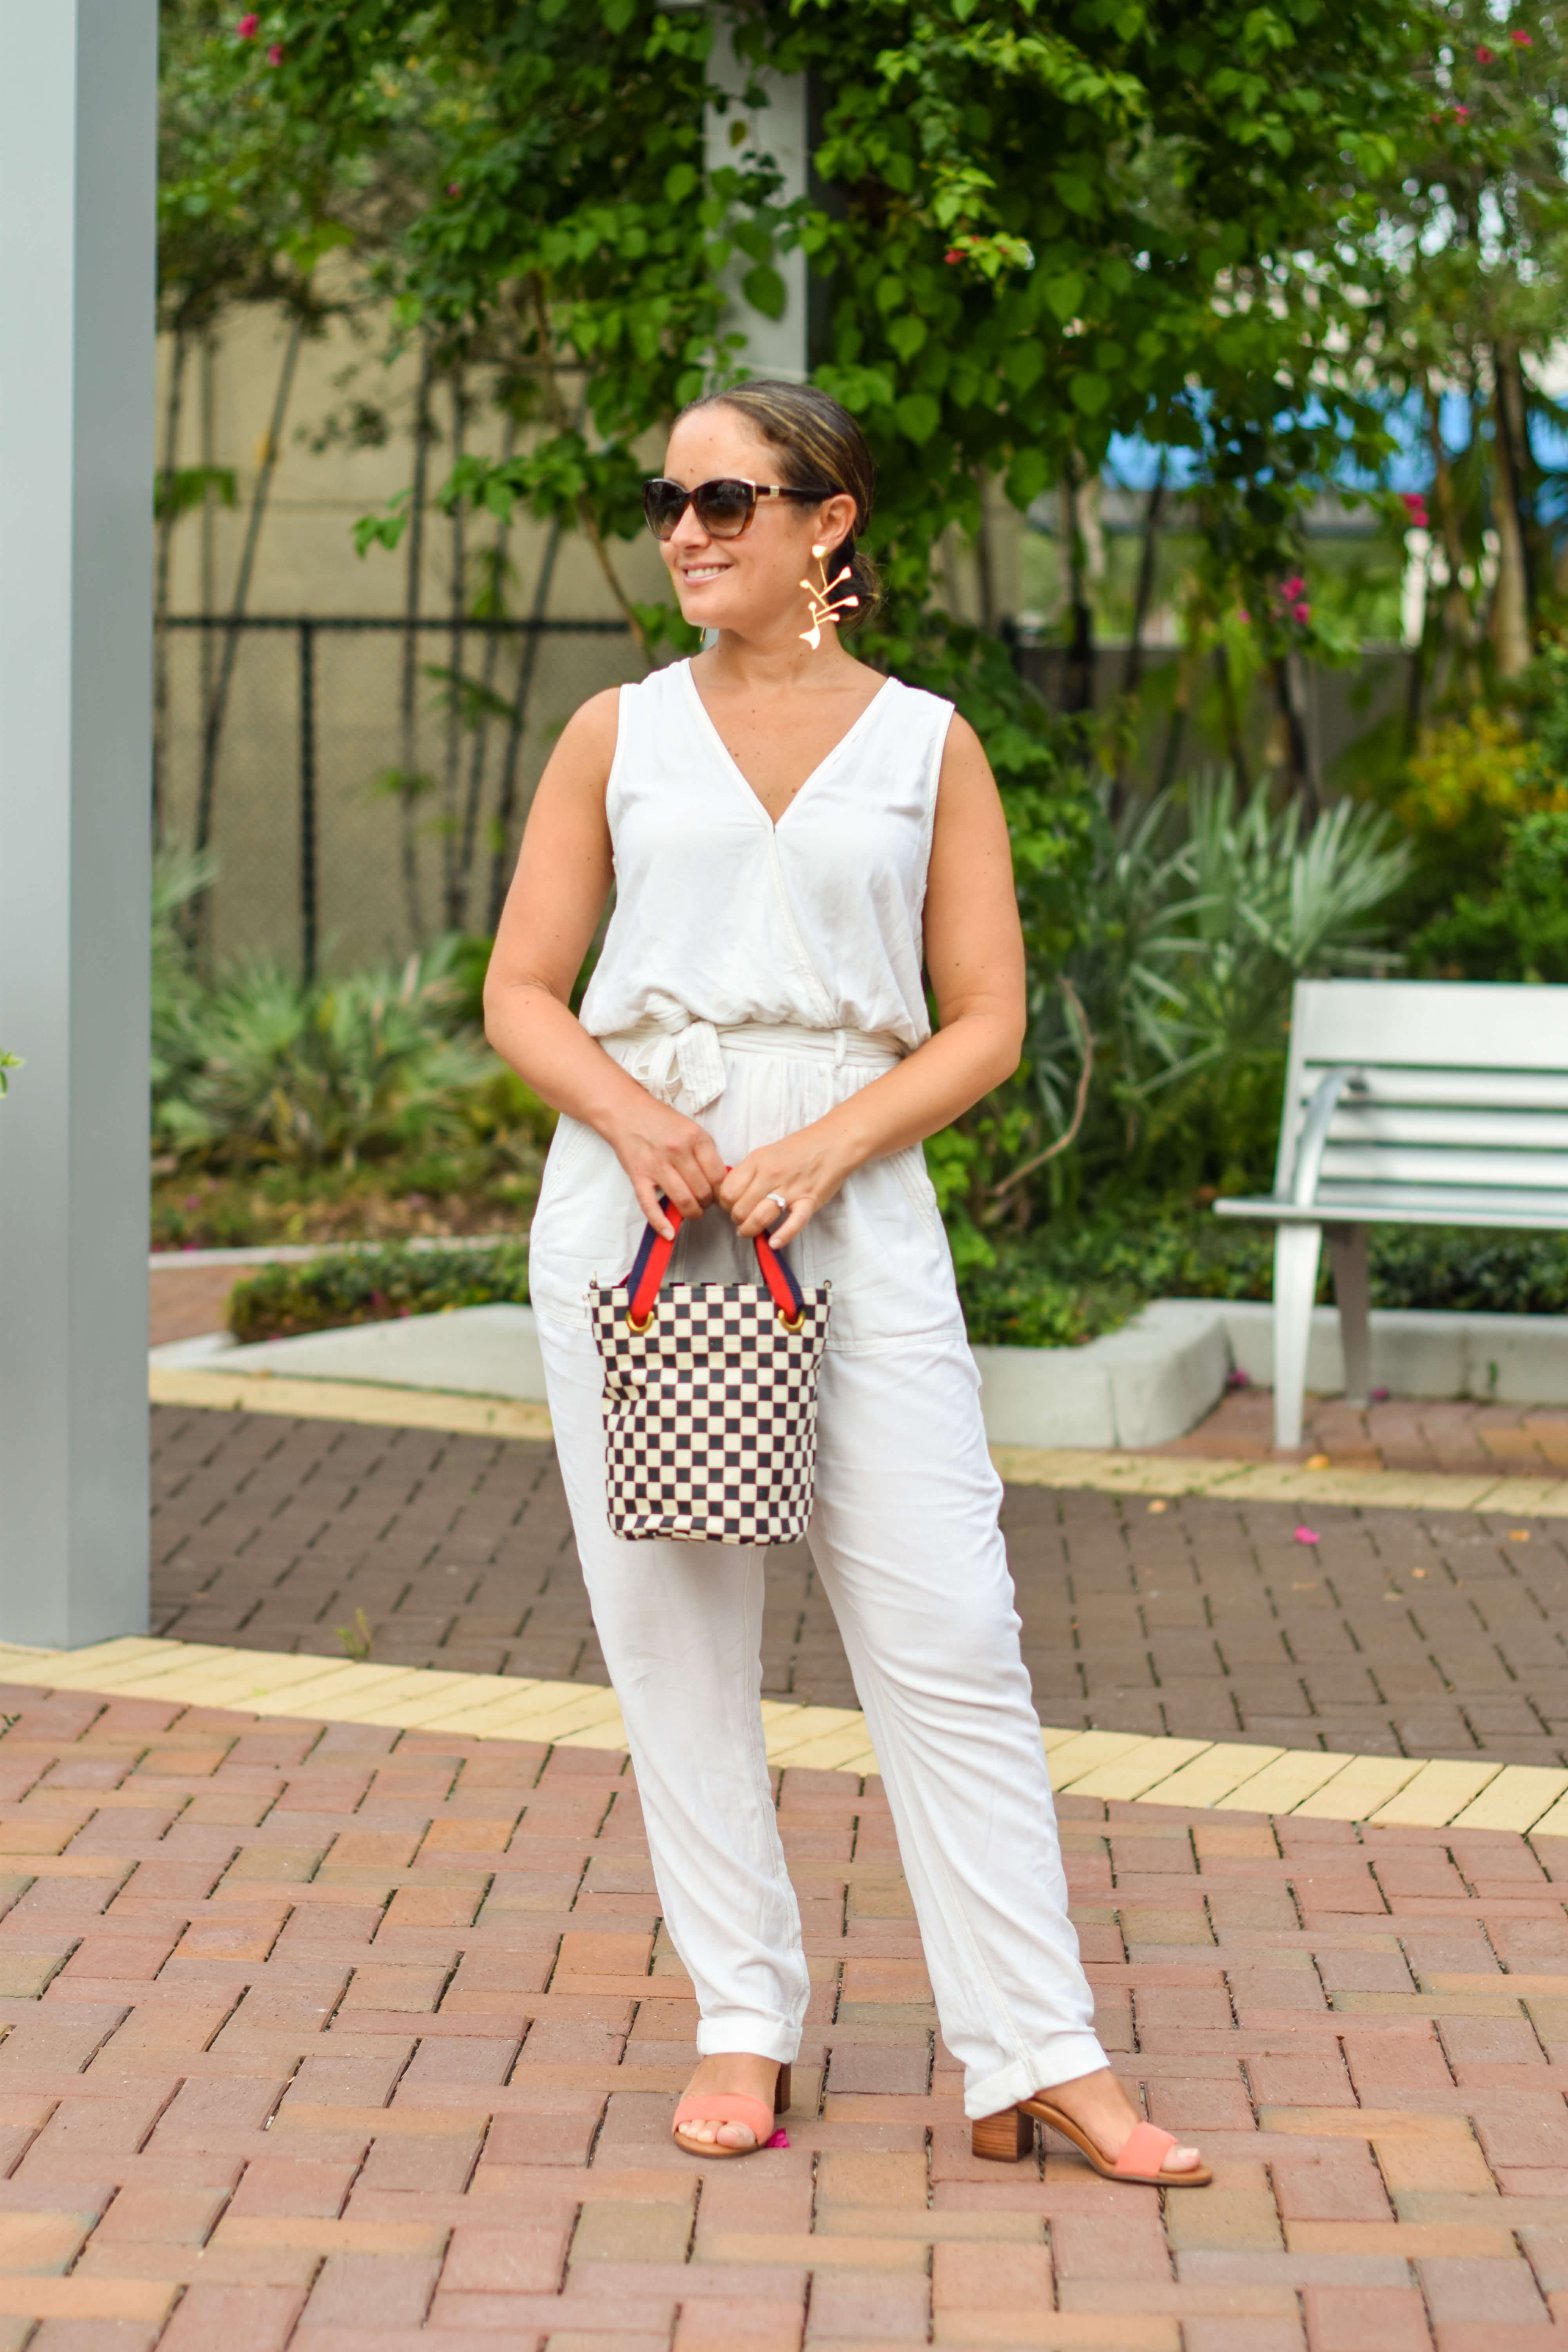 Splendid Jumpsuit Vionic Shoes Tory Burch Earrings Clare V Bag Outfit by Modnitsa Styling